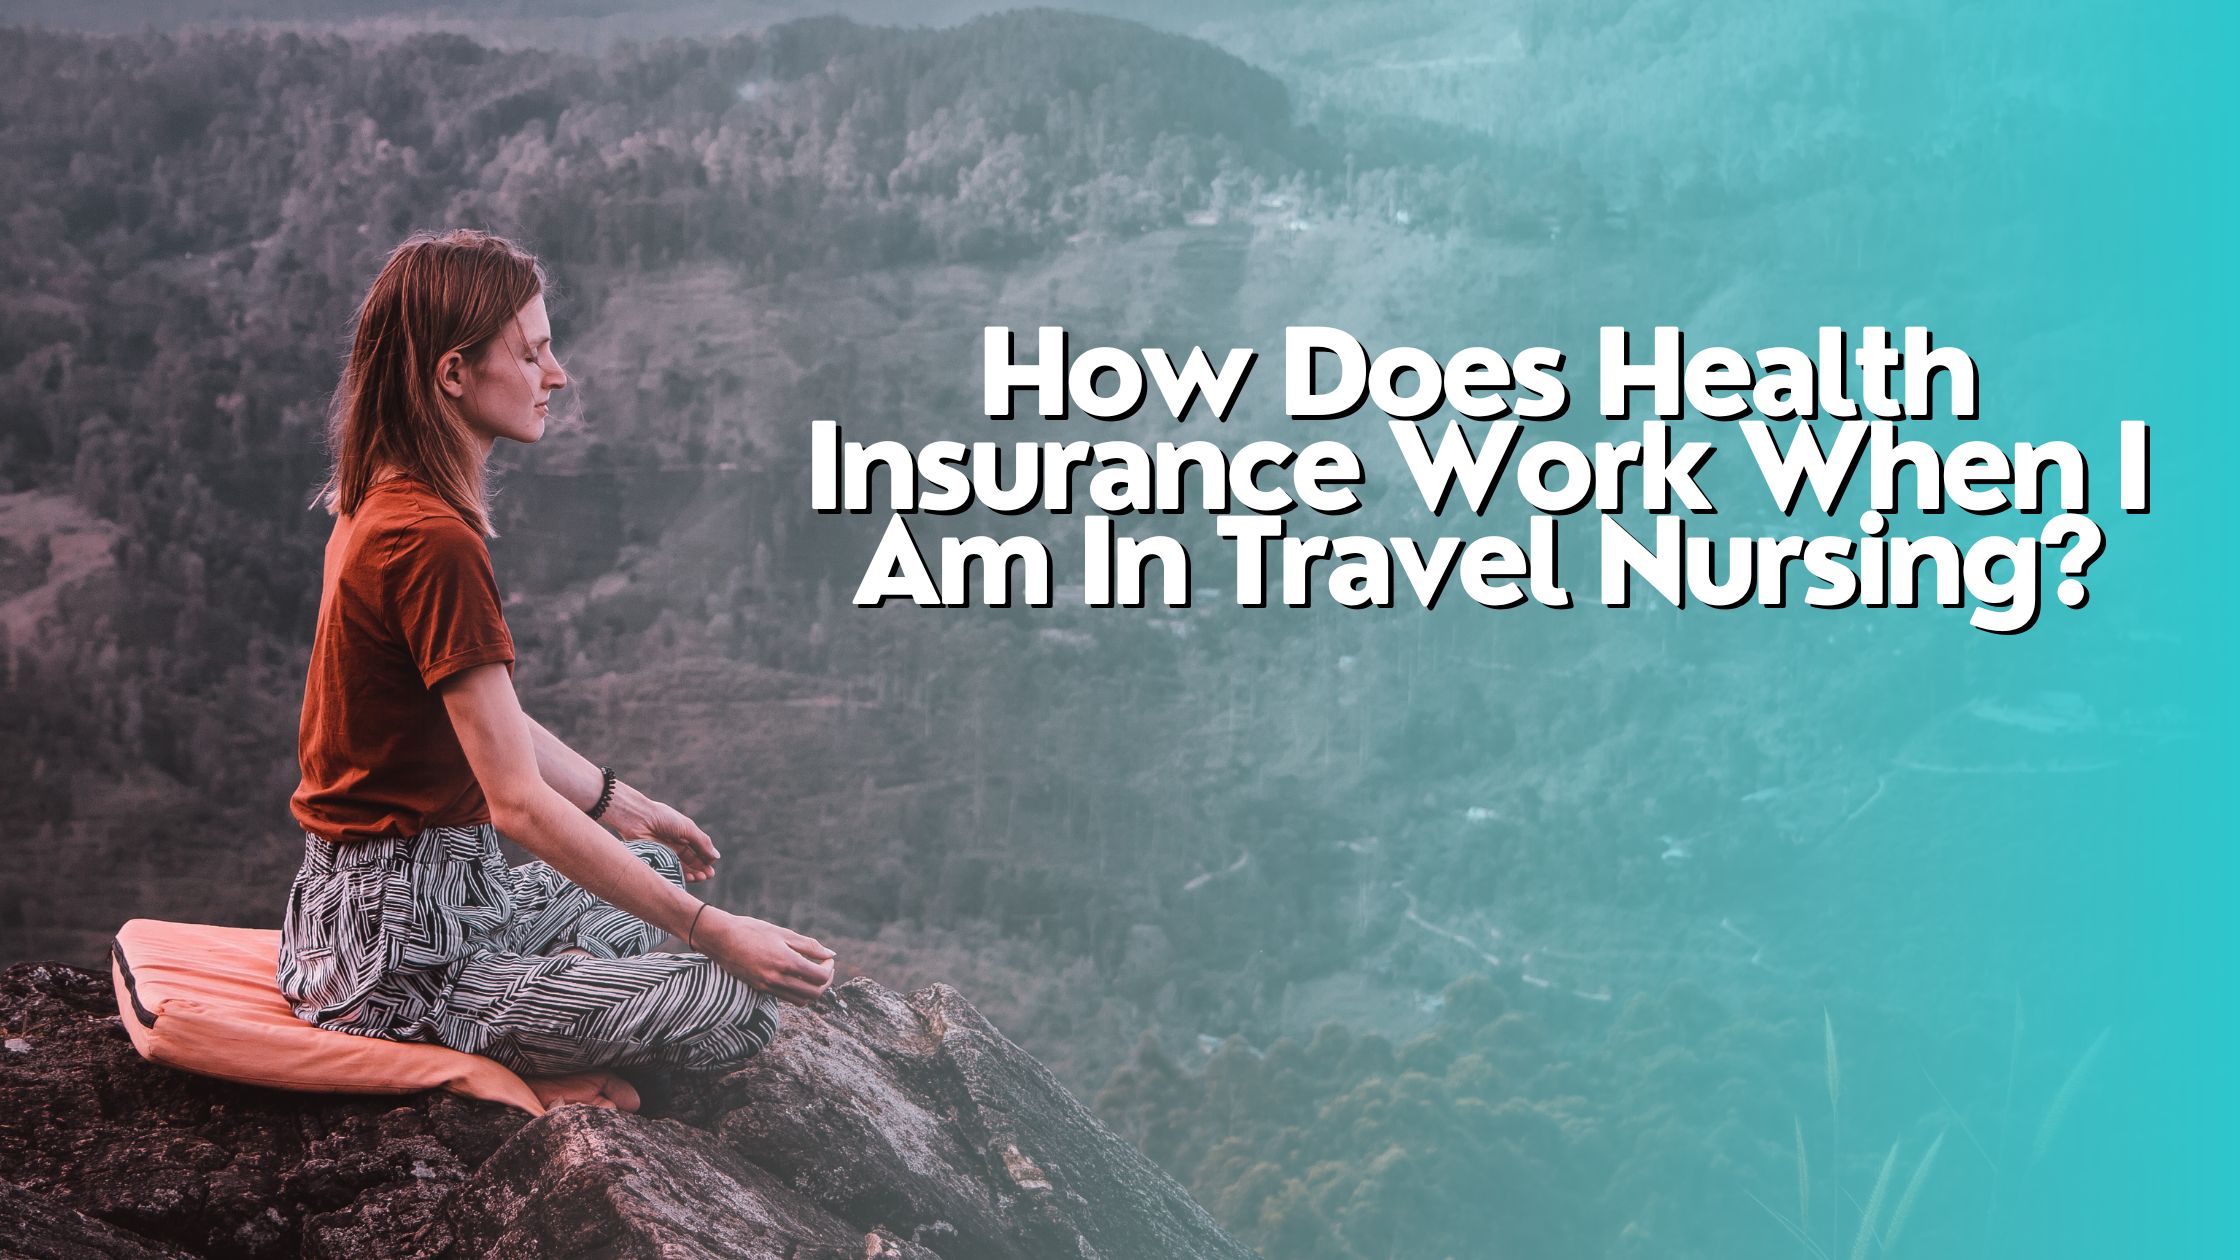 How Does Health Insurance Work When I Am In Travel Nursing